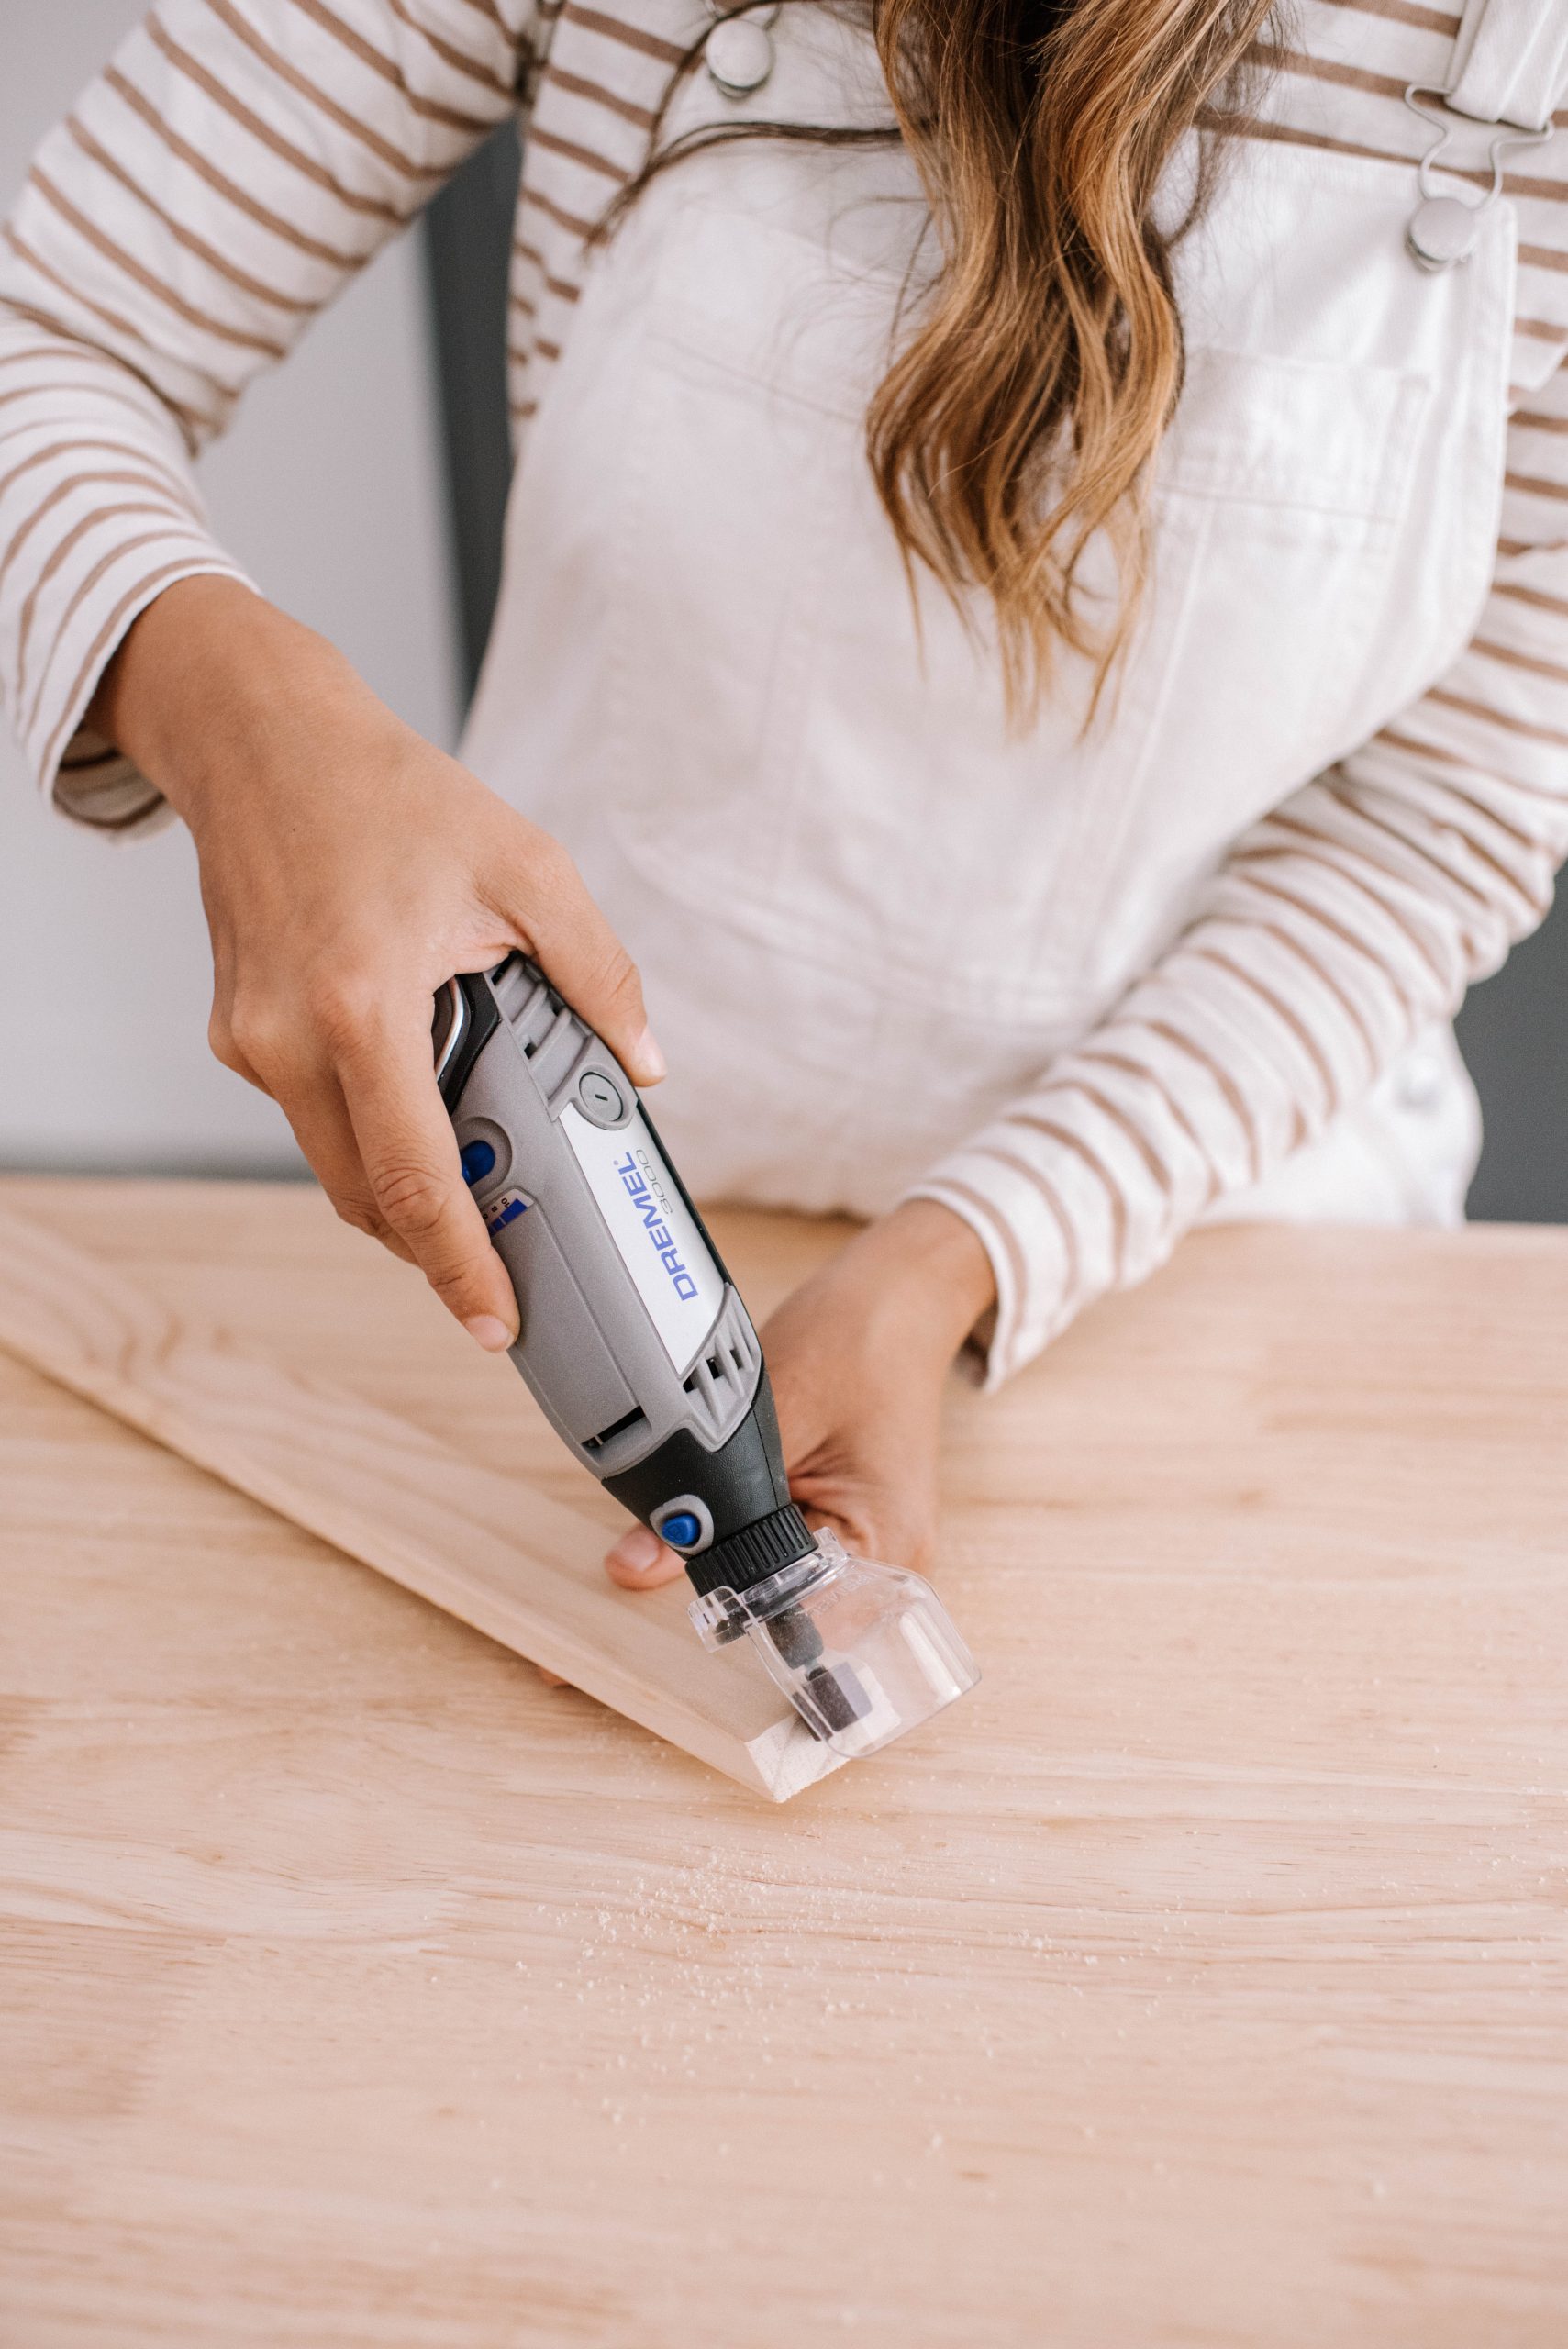 Dremel 4300 VS Dremel 4000 - Which One is Better For Your Upcoming